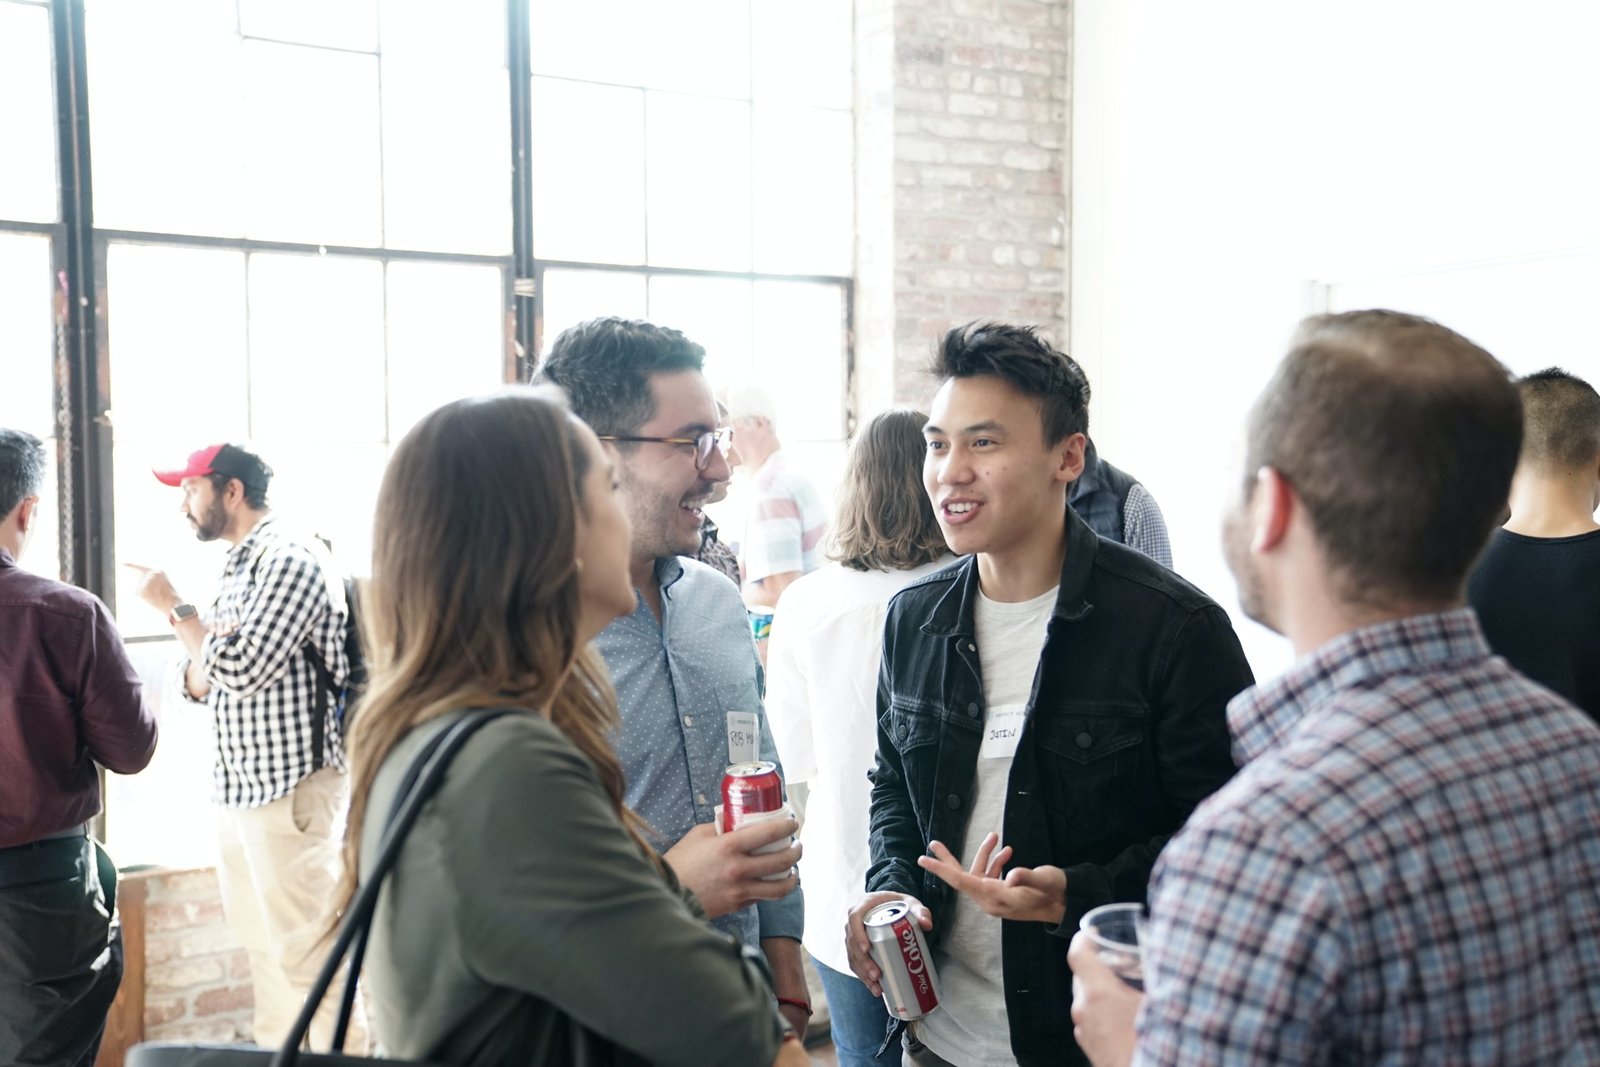 Networking beyond small talk